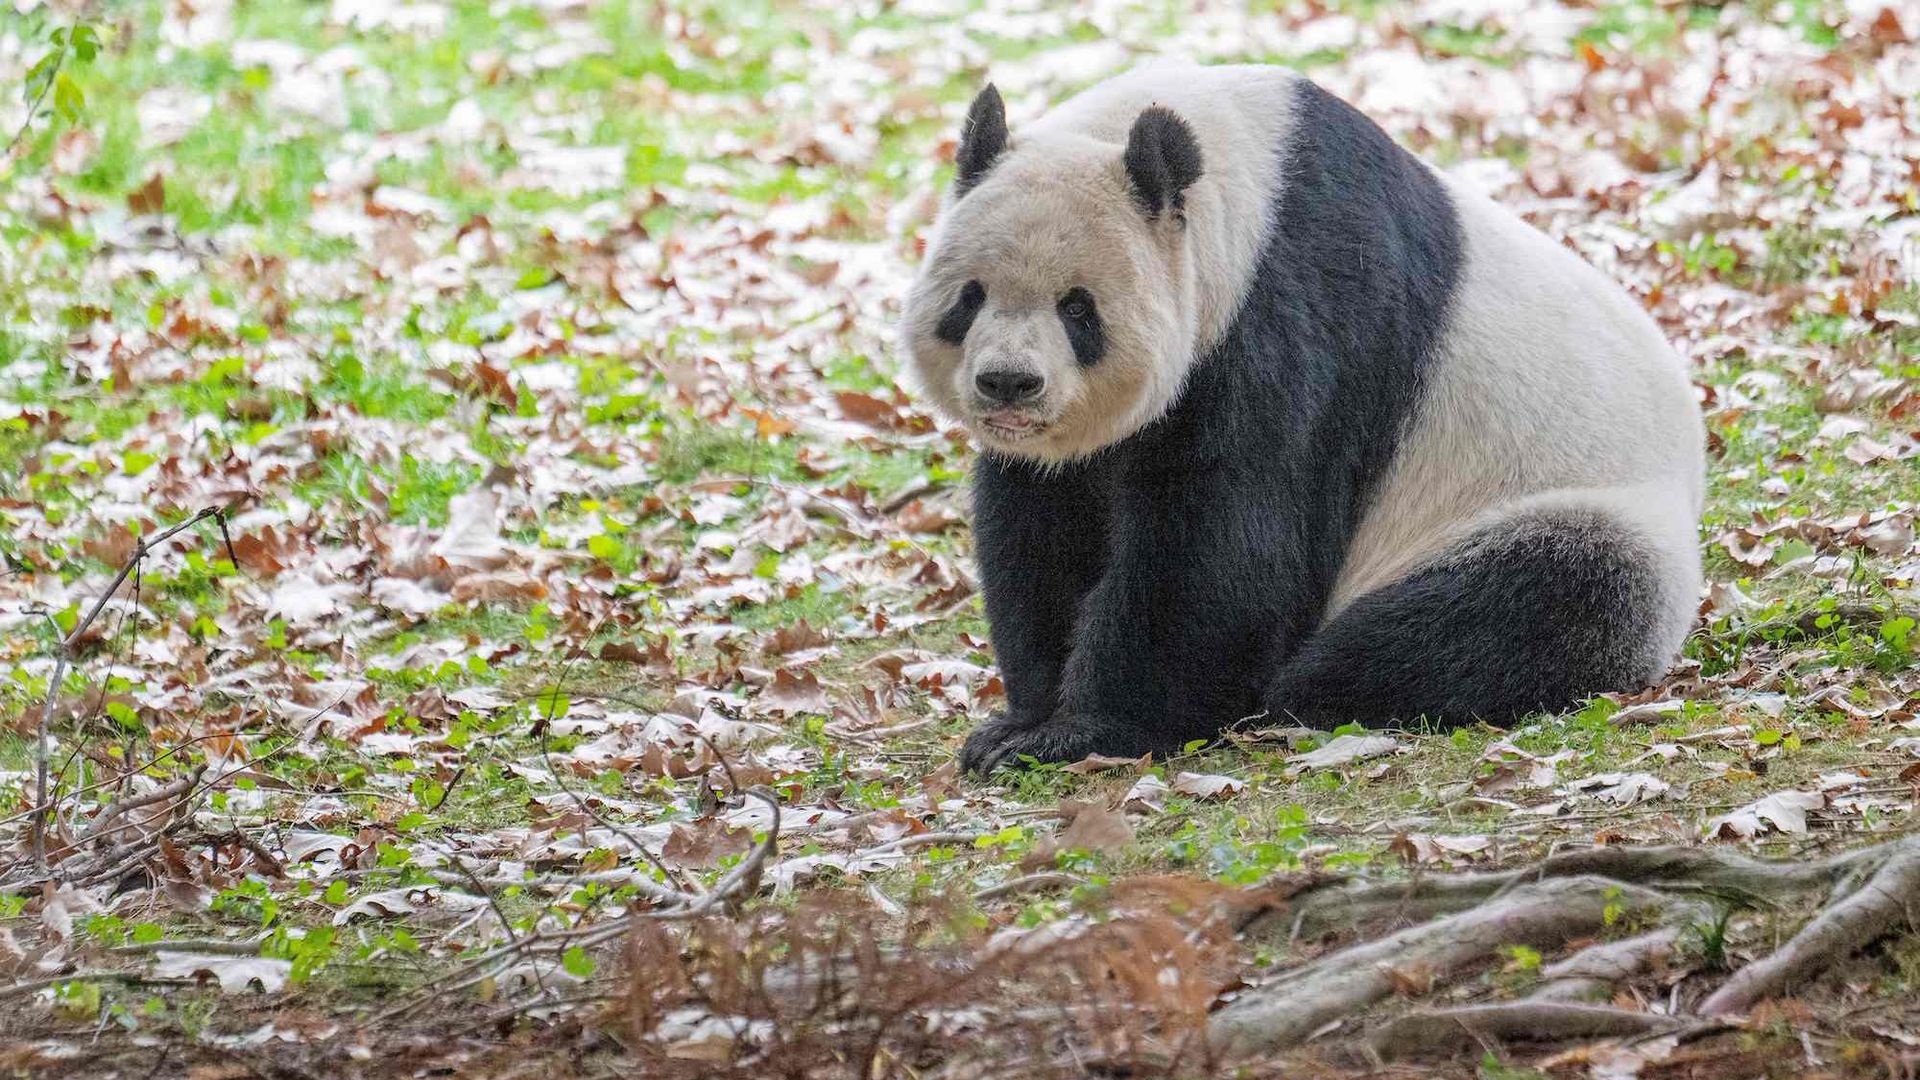 Giant Panda Tian Tian rests in its enclosure at the Smithsonian's National Zoo. Photo: Jim Watson/AFP via Getty Images